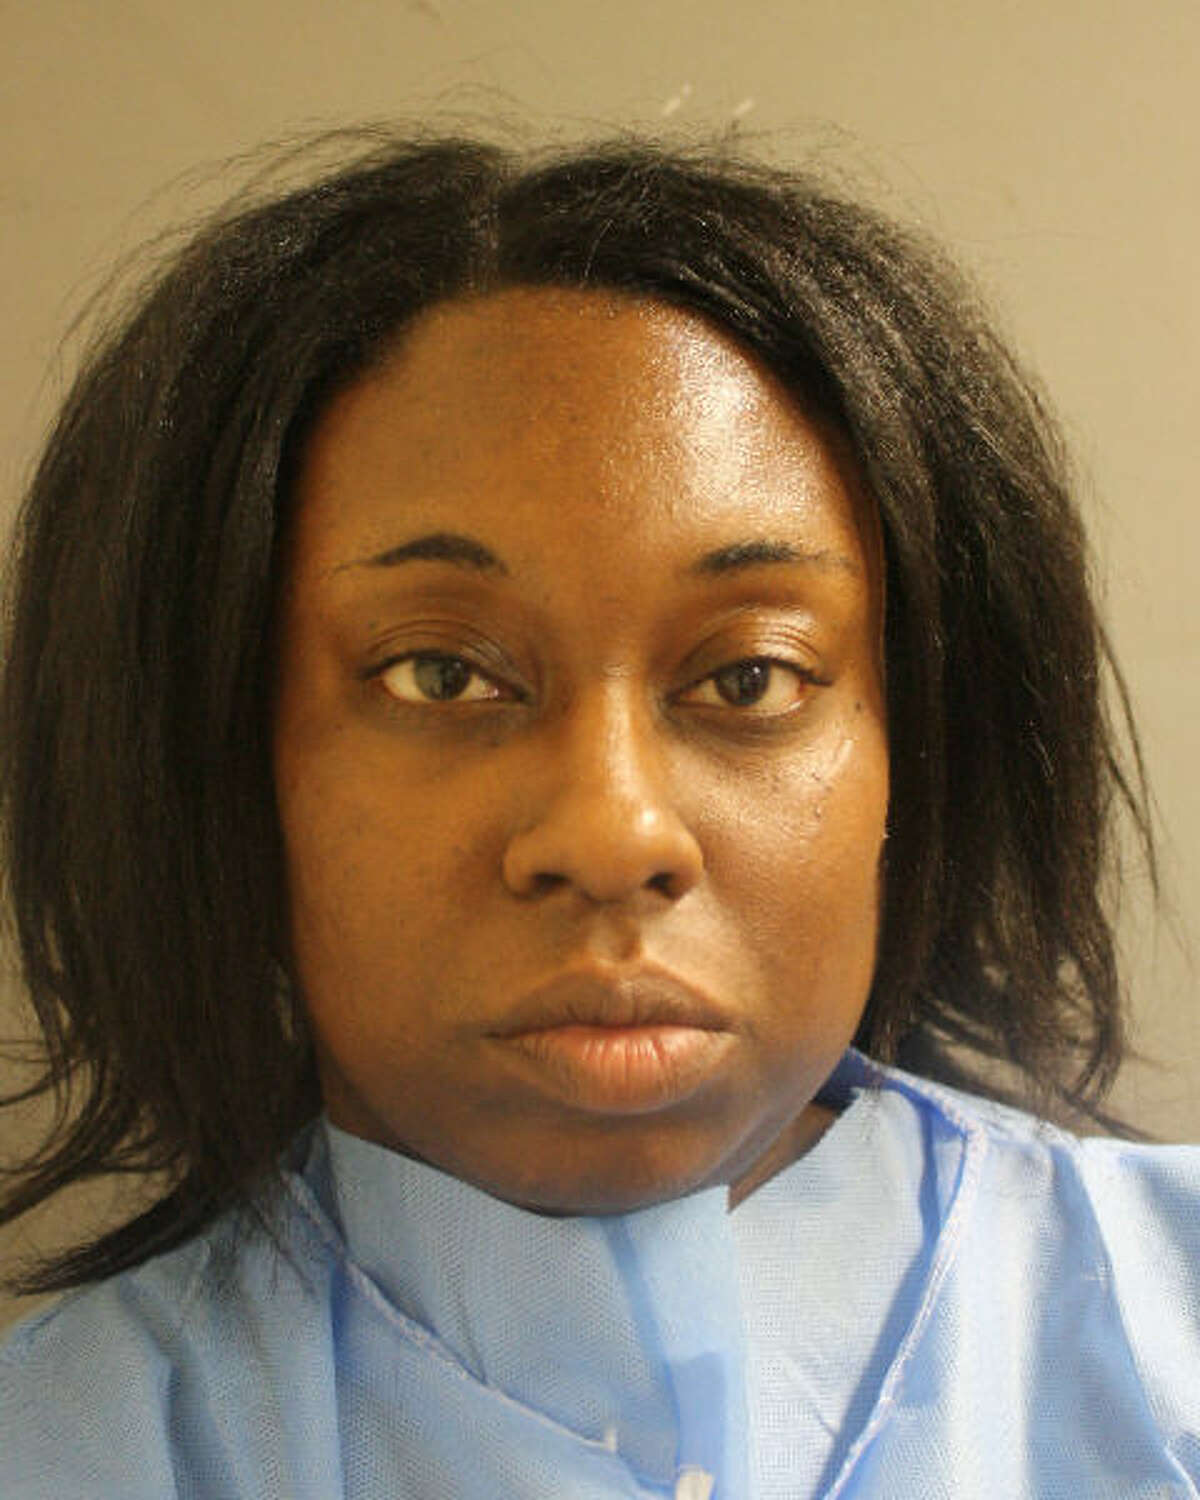 FILE - A mugshot of Laquita Lewis on June 18, 2017. Lewis is accused of stabbing and killing her 4-year-old daughter at a northwest Harris County apartment complex.